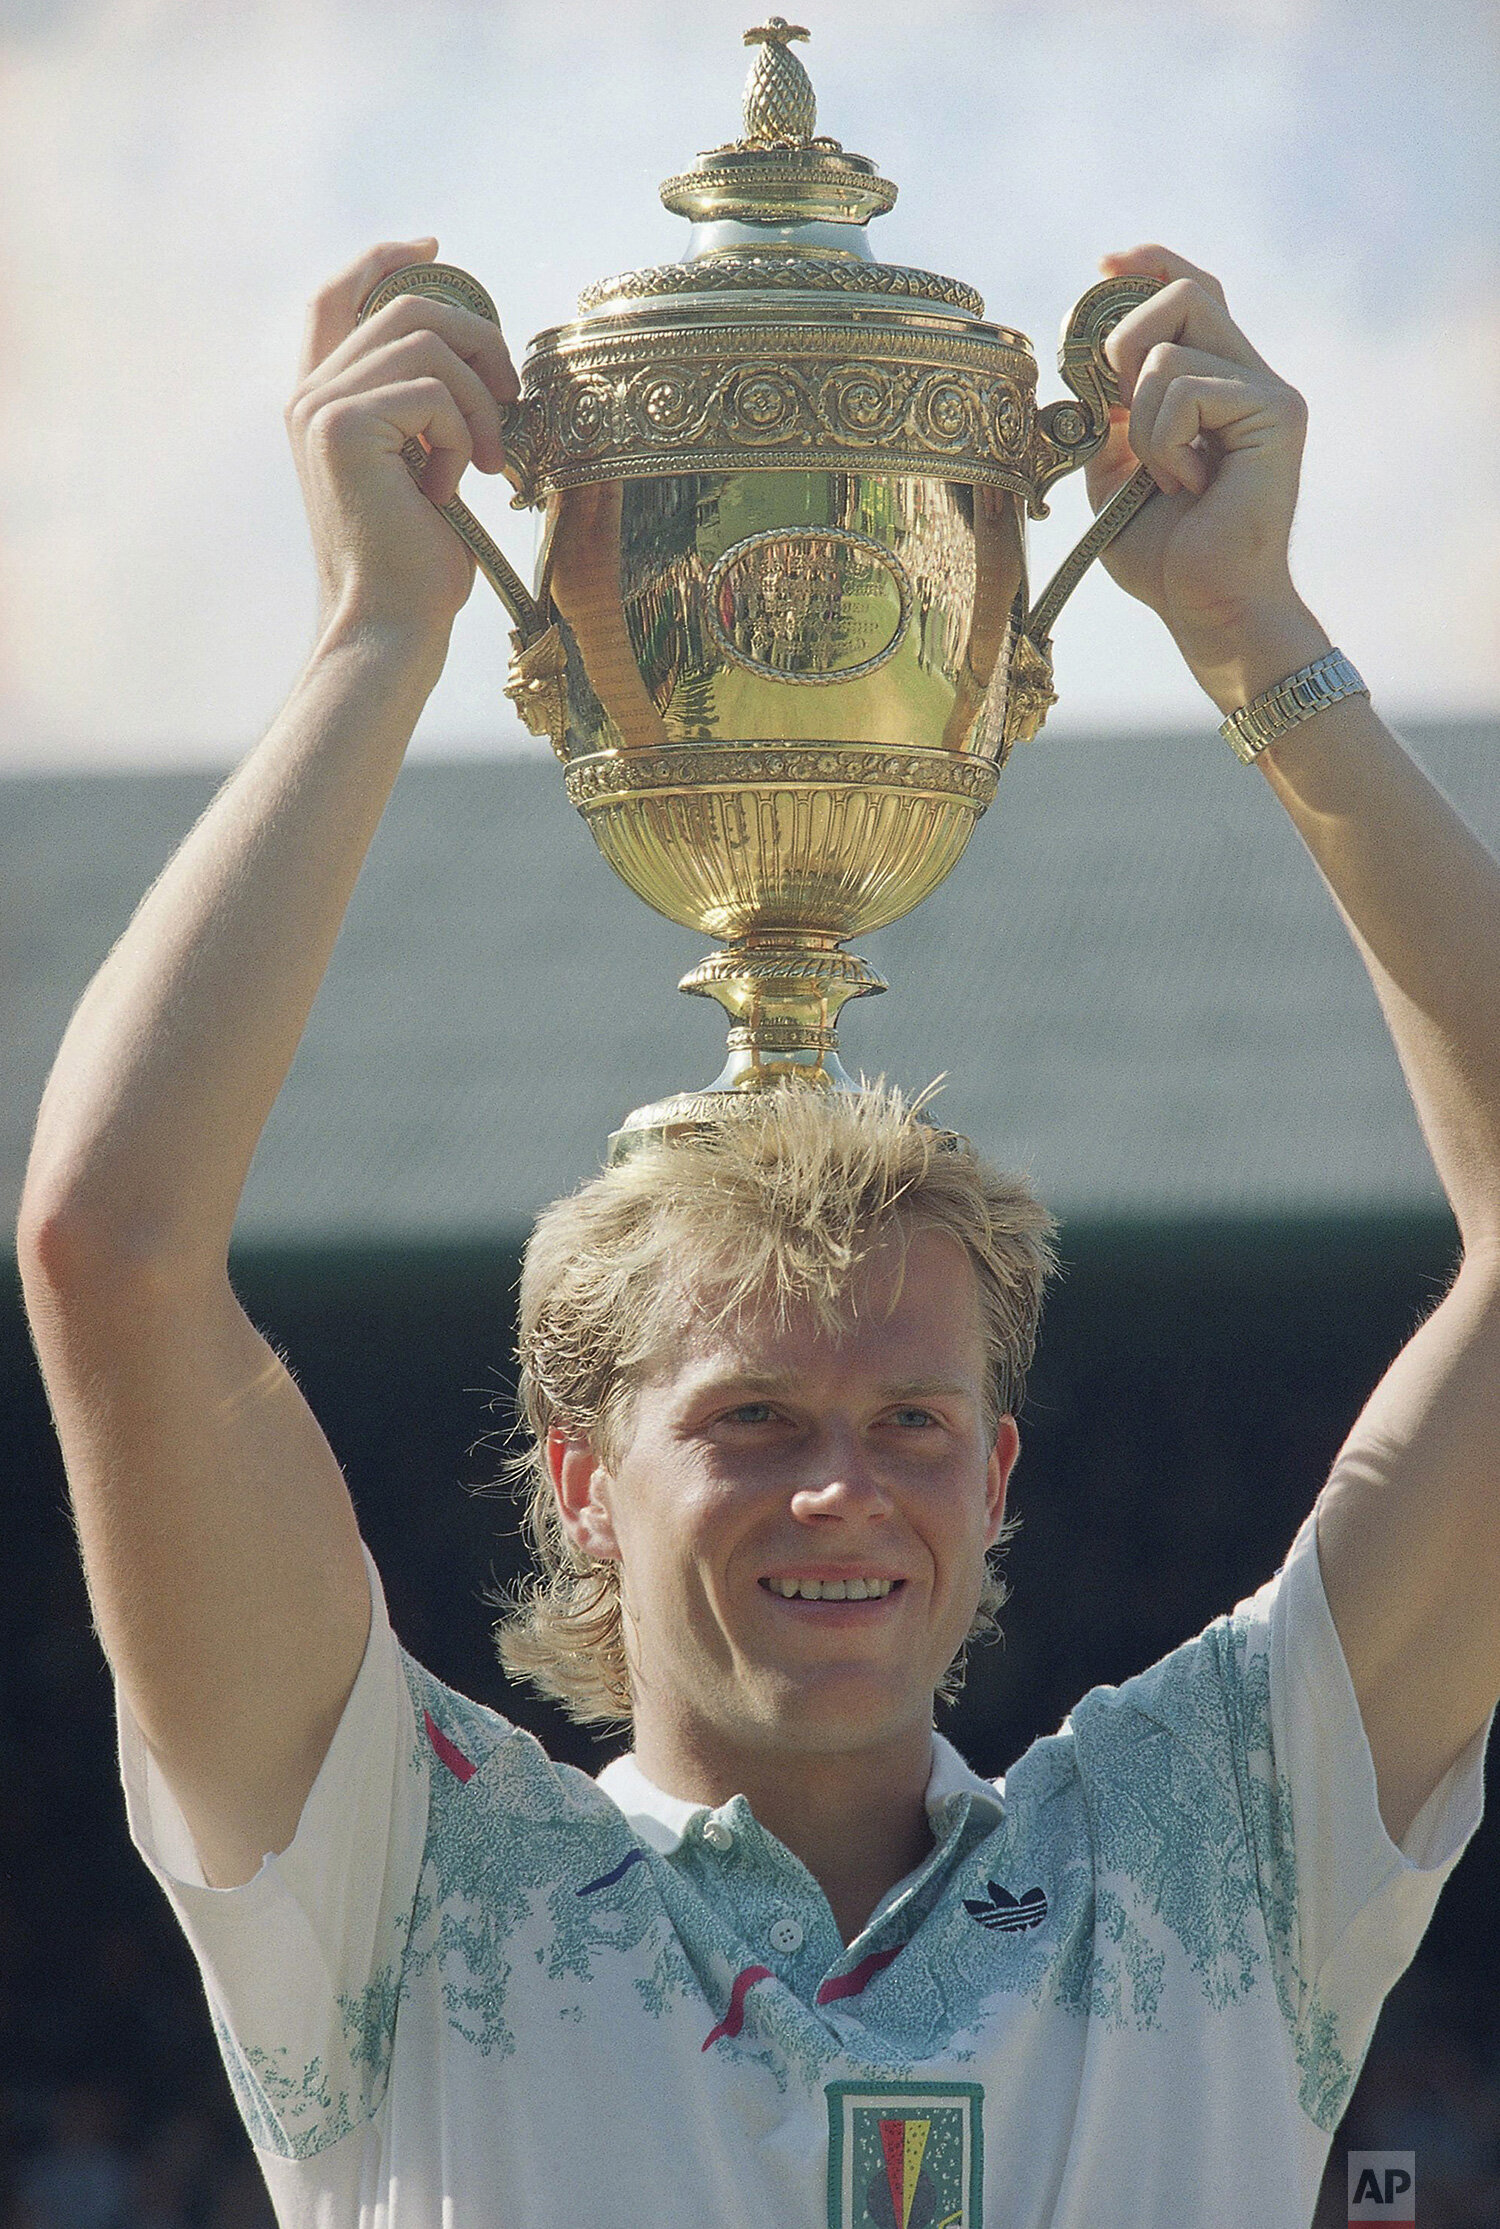  Sweden's Stefan Edberg celebrates with his trophy after beating West Germany's Boris Becker in the mens singles championship at Wimbledon on Sunday, July 9, 1990. Edberg beat Becker 6-2, 6-2, 3-6, 3-6, 6-4 for his second singles title at Wimbledon. 